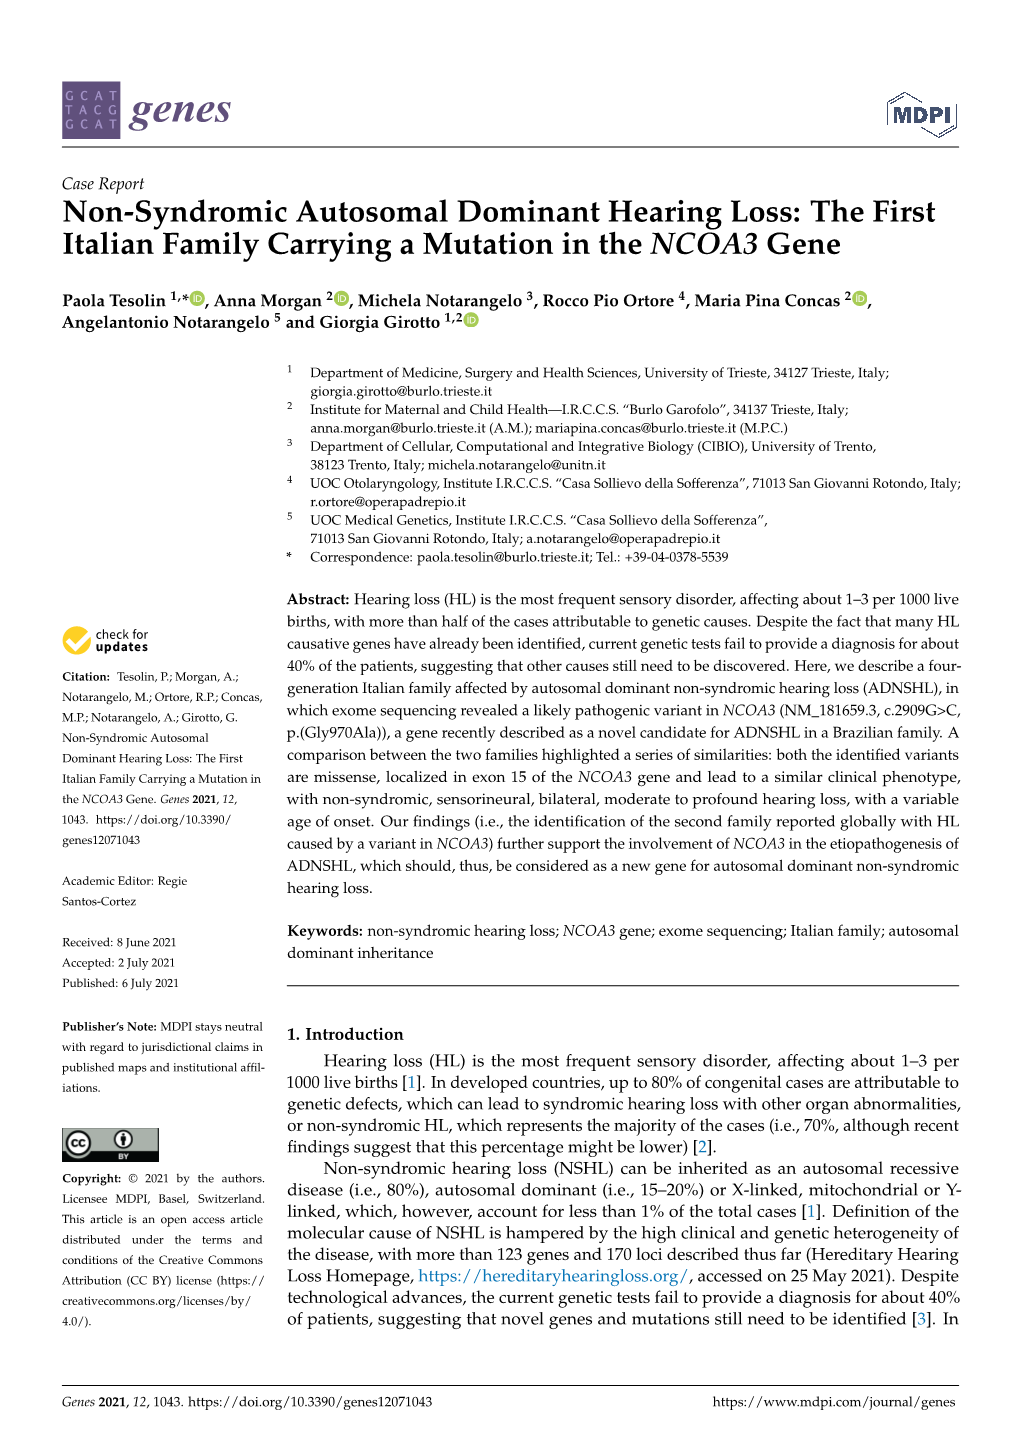 Non-Syndromic Autosomal Dominant Hearing Loss: the First Italian Family Carrying a Mutation in the NCOA3 Gene